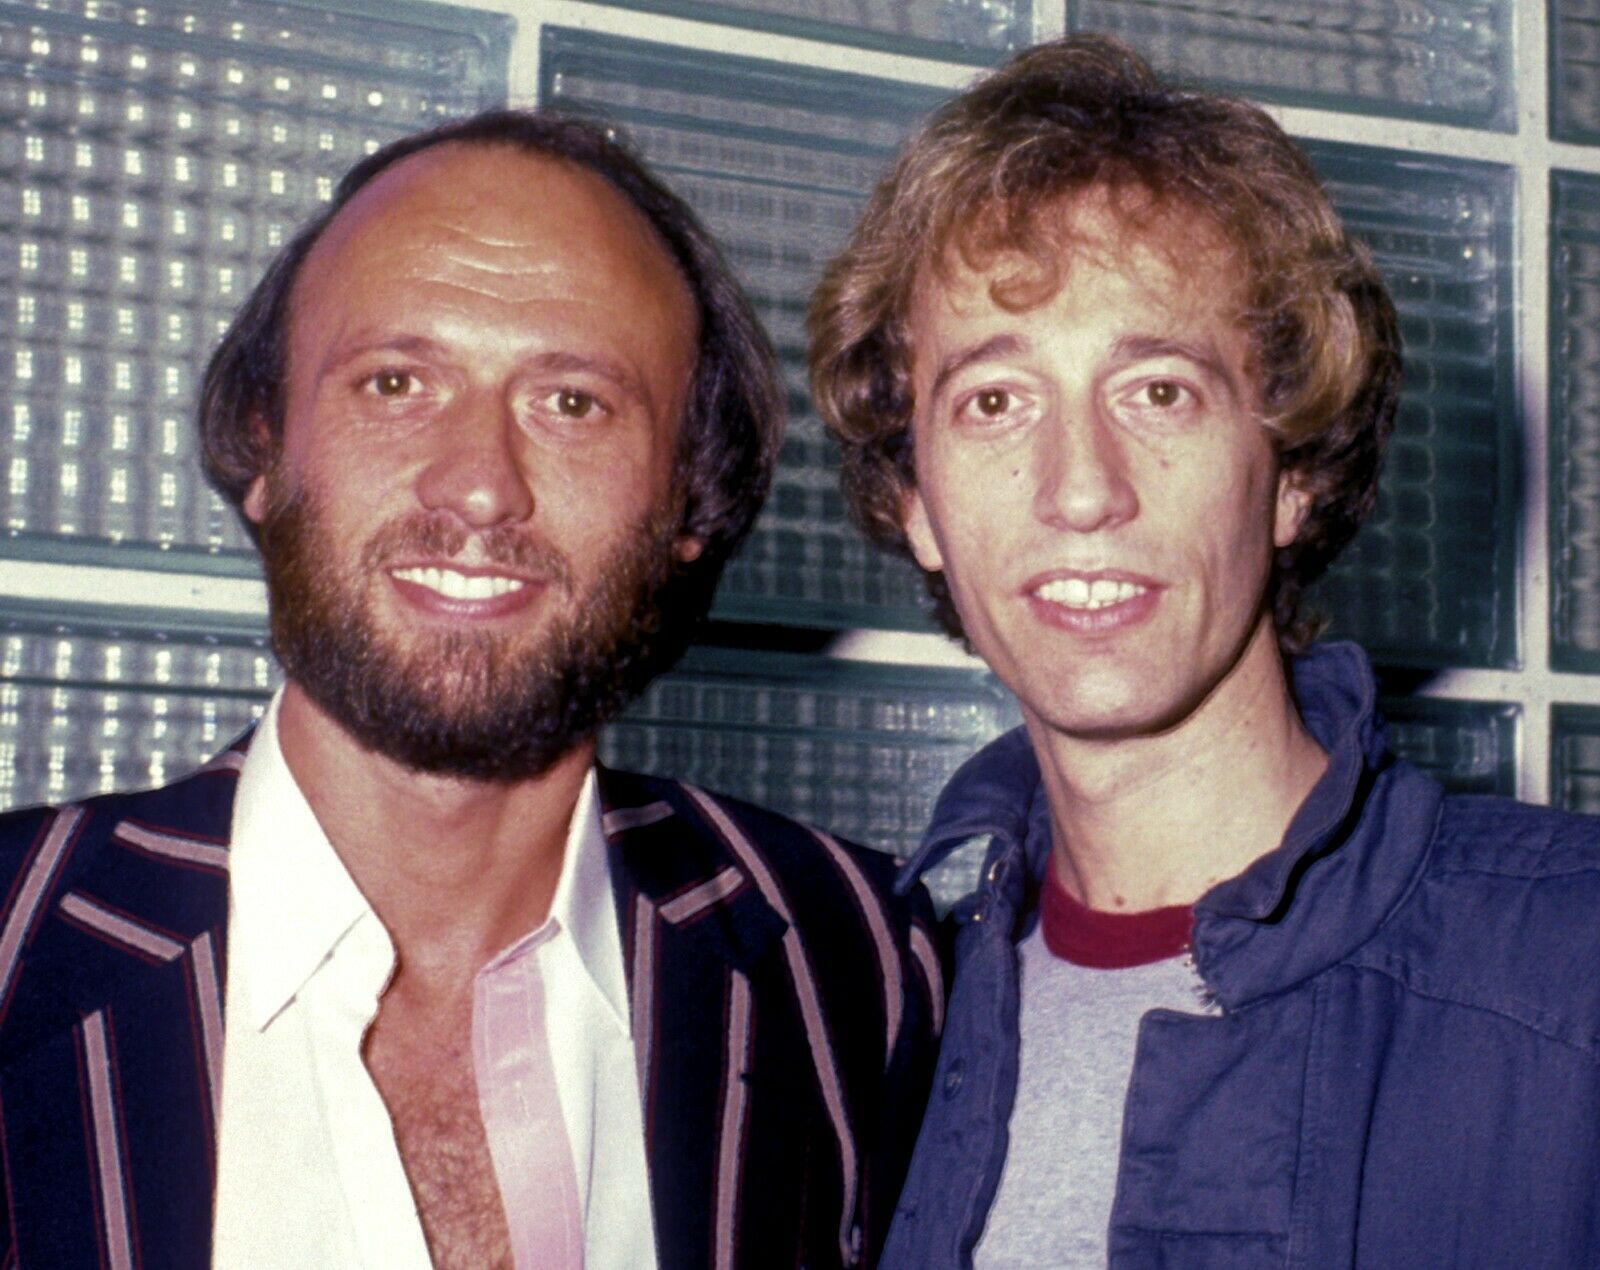 The Bee Gees - Music Photo #a-5